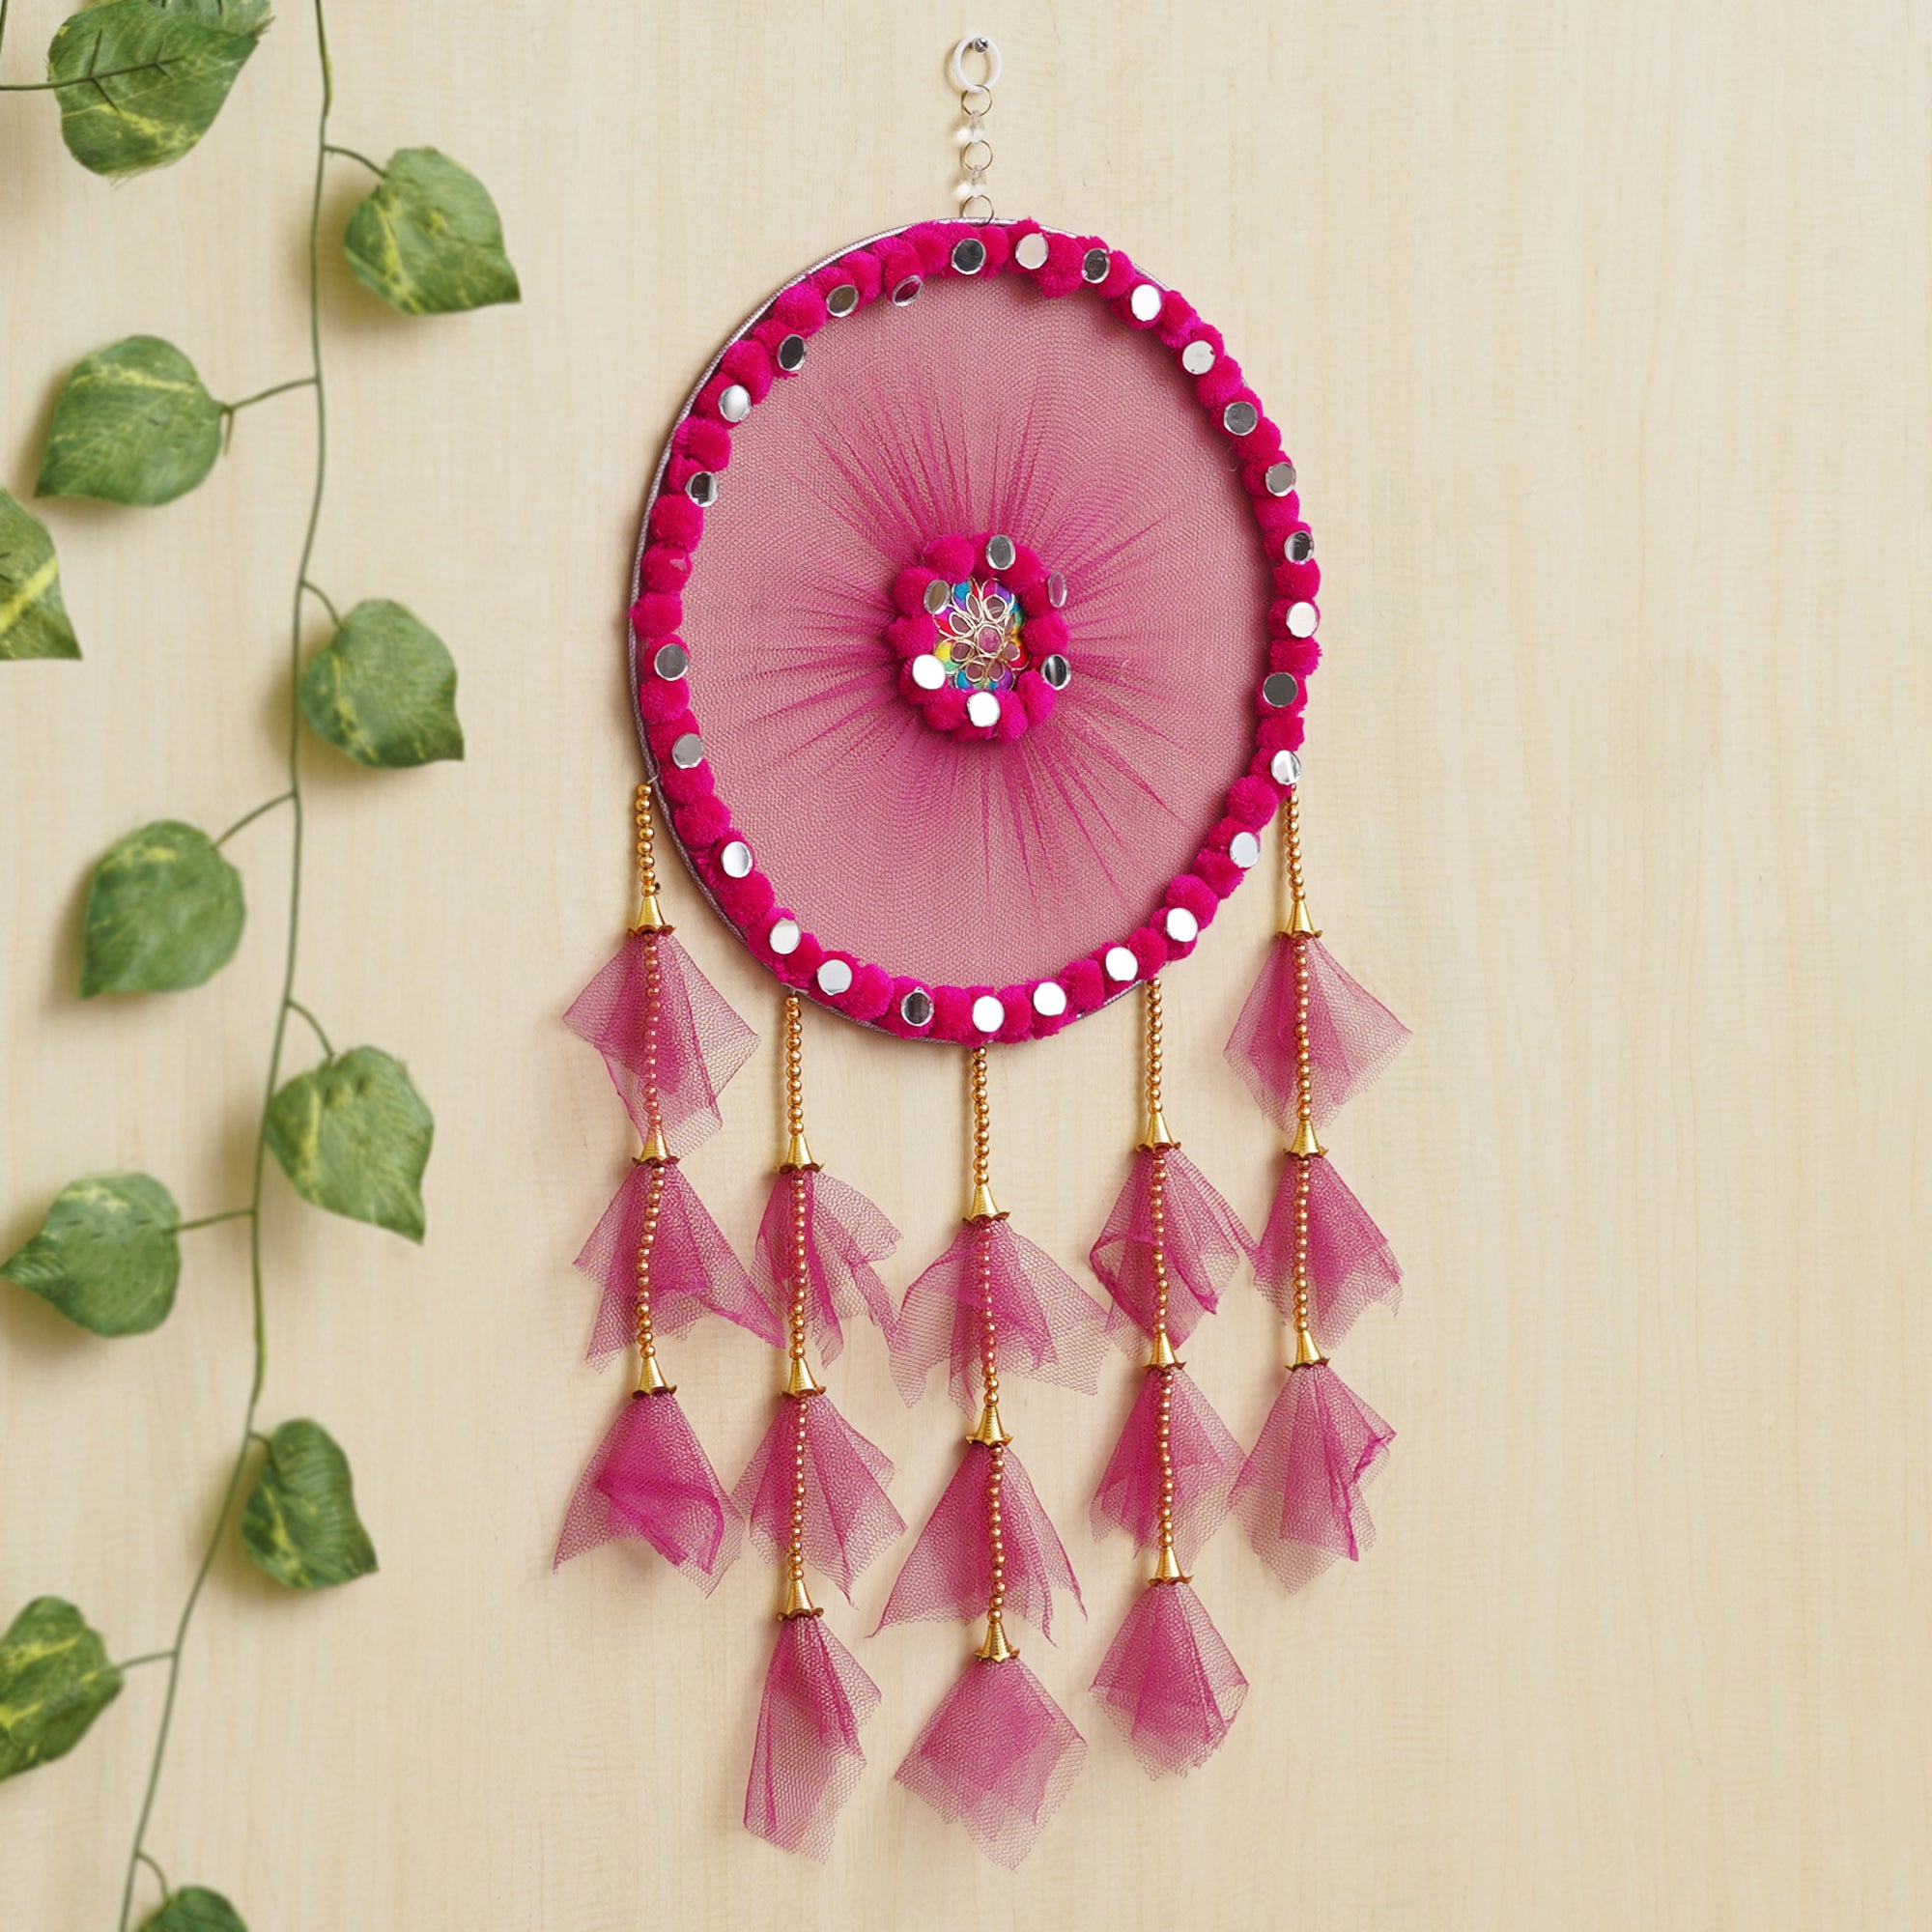 eCraftIndia Pink Wall Hanging Dream Catcher For Home Decor - Perfect Window, Bedroom, Living Room, Wall Decoration Item